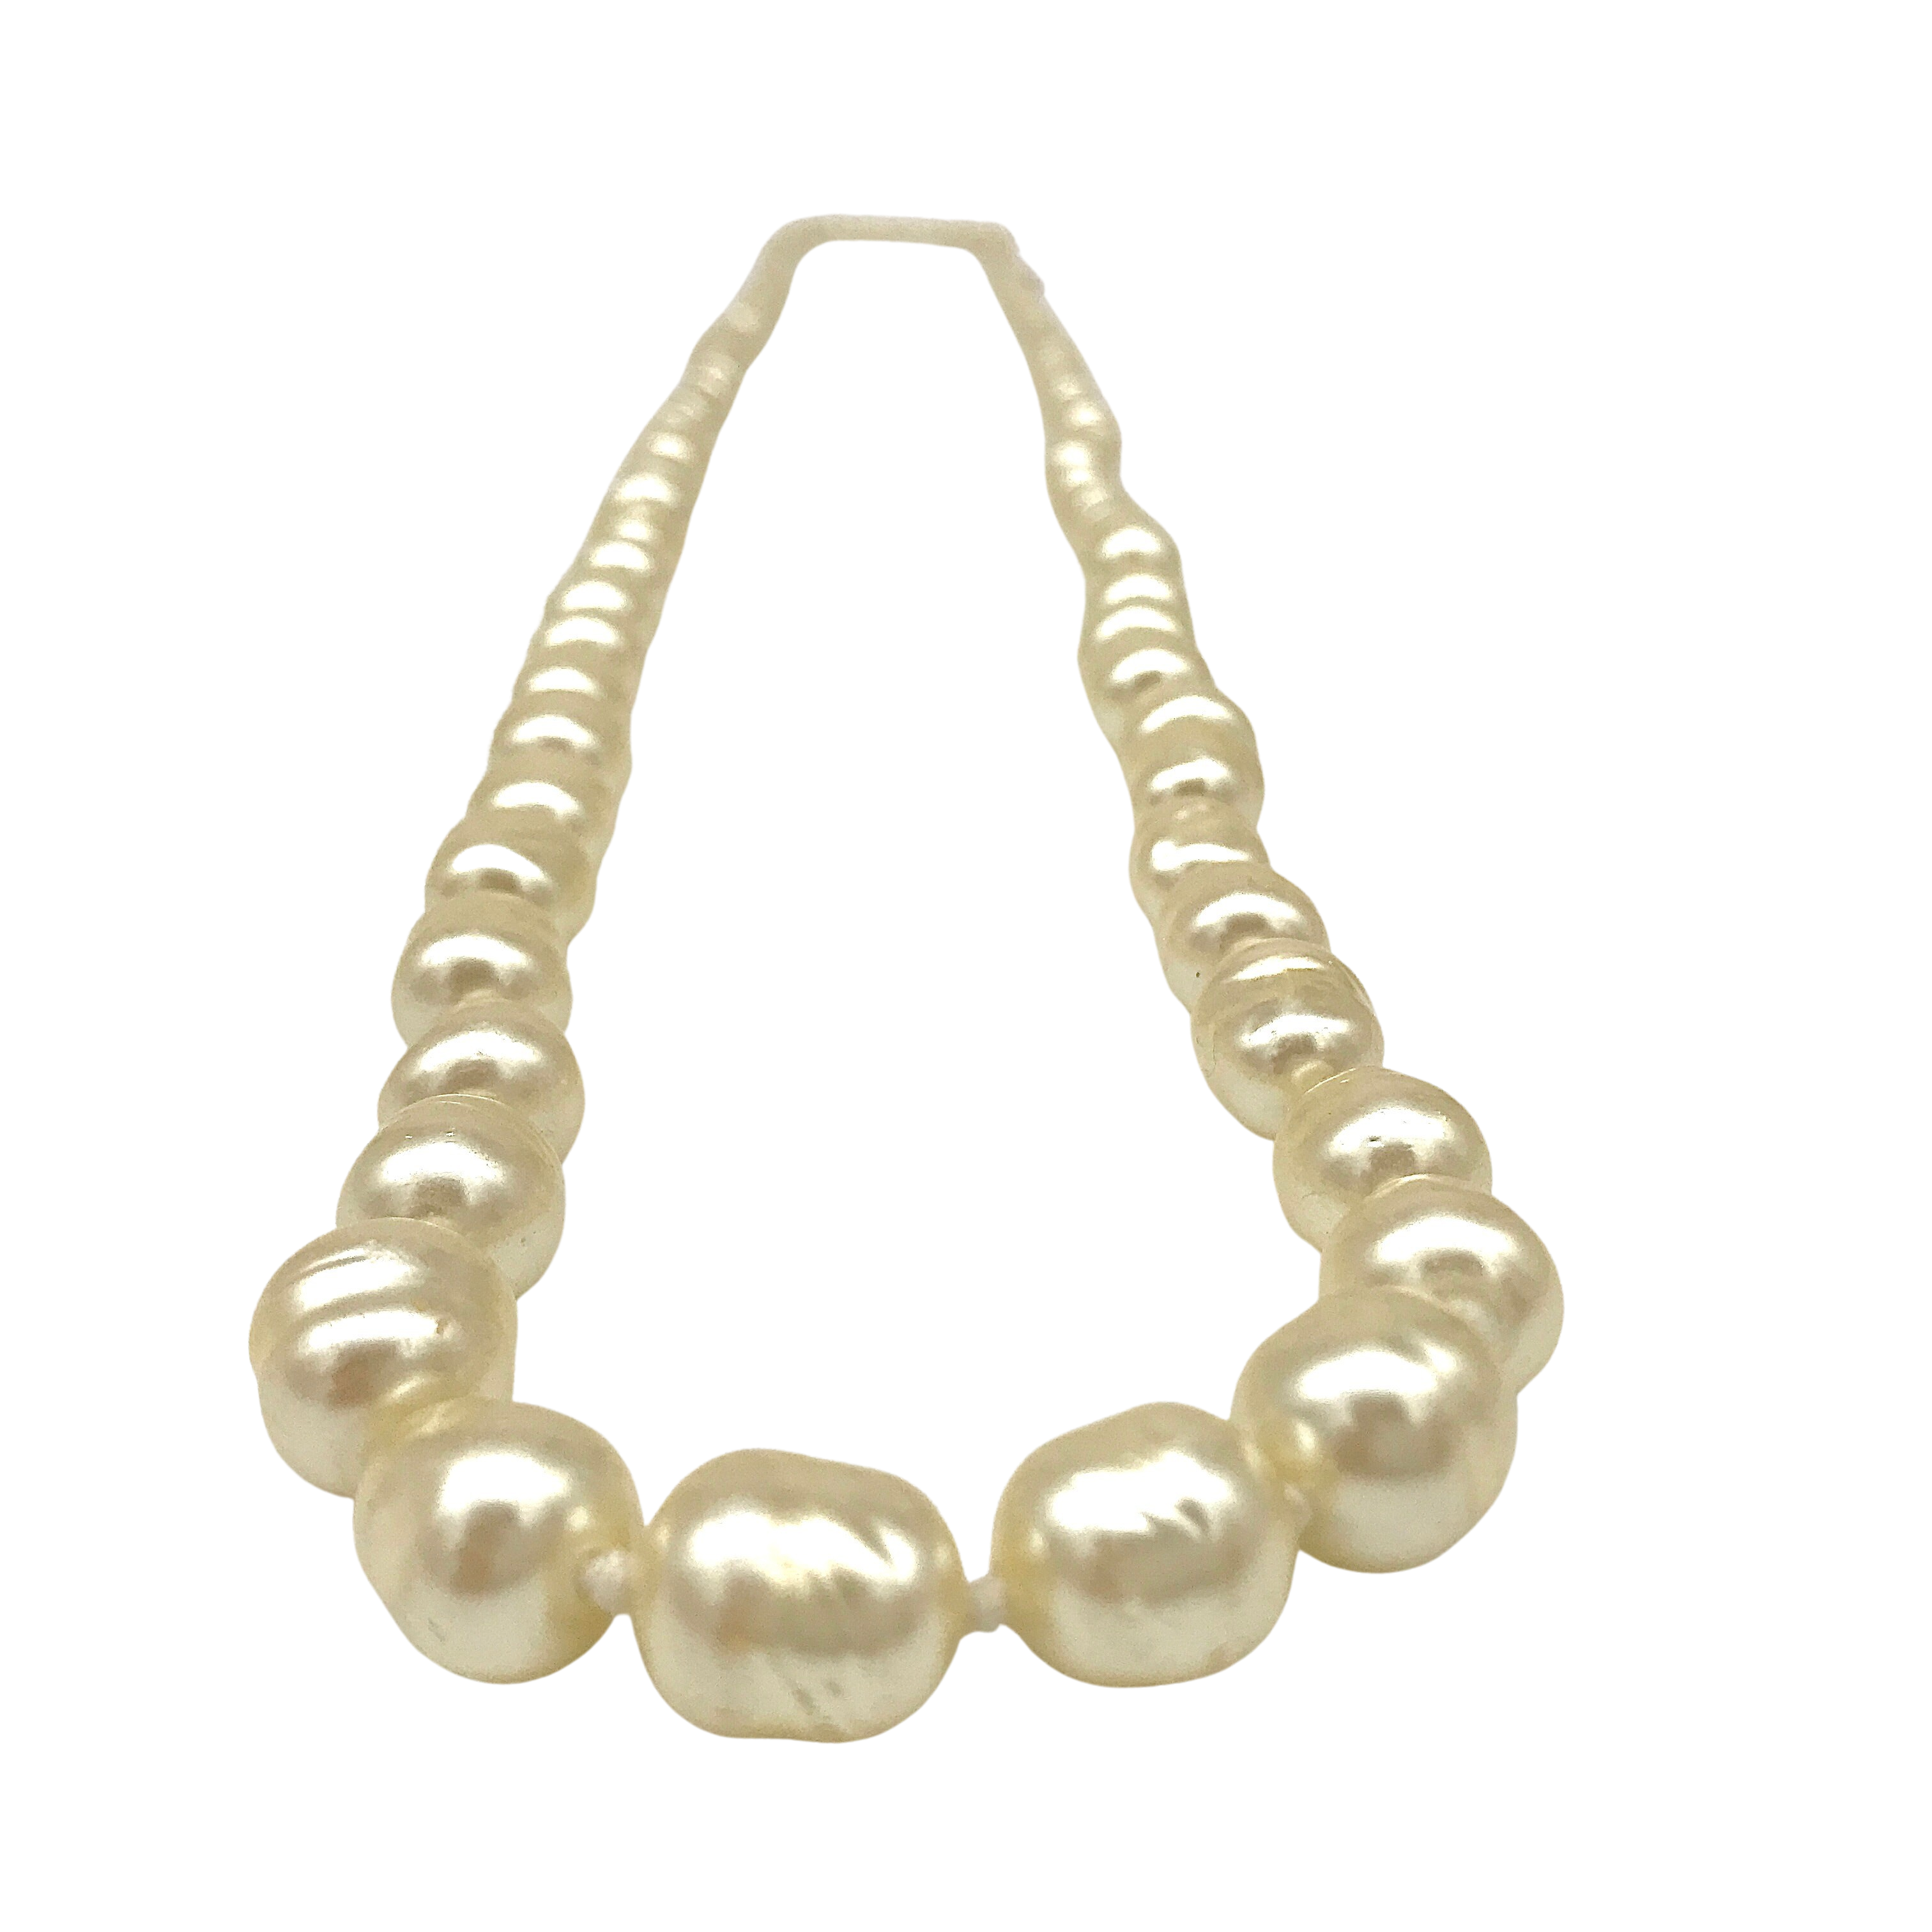 chanel pearl chain necklace